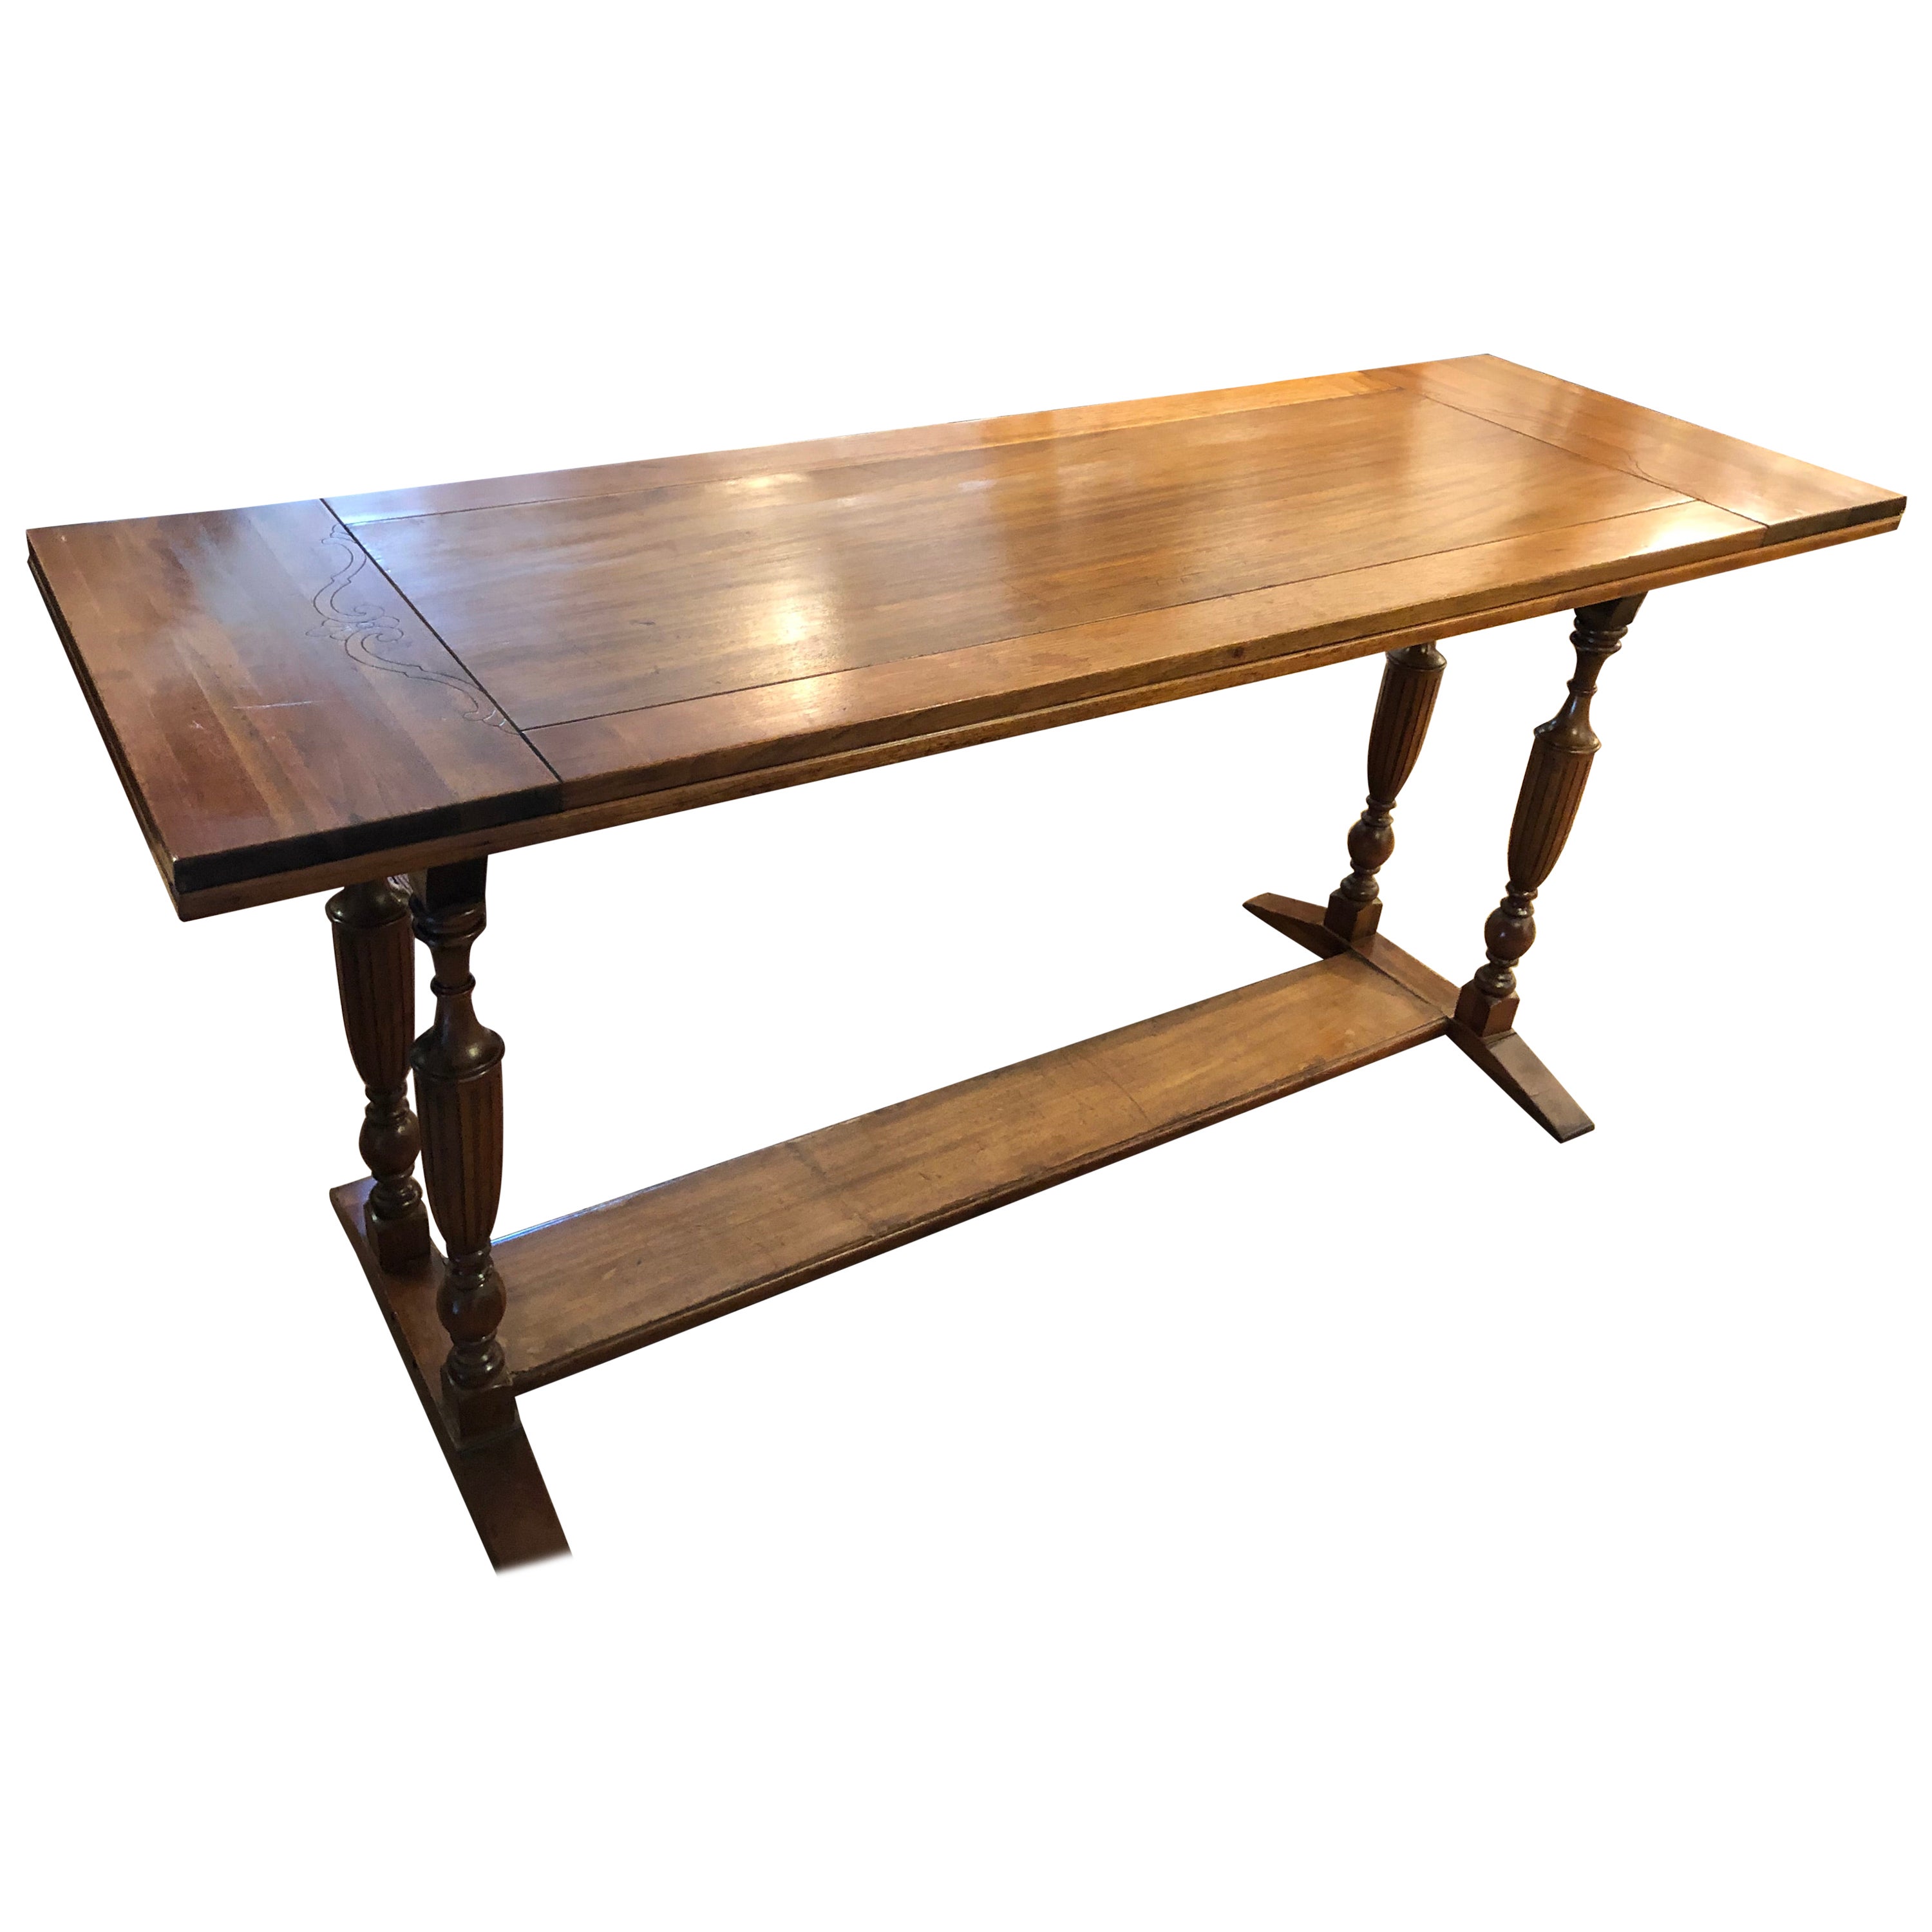 Rectangular Oak Console Table with Carved Urn Motif Legs